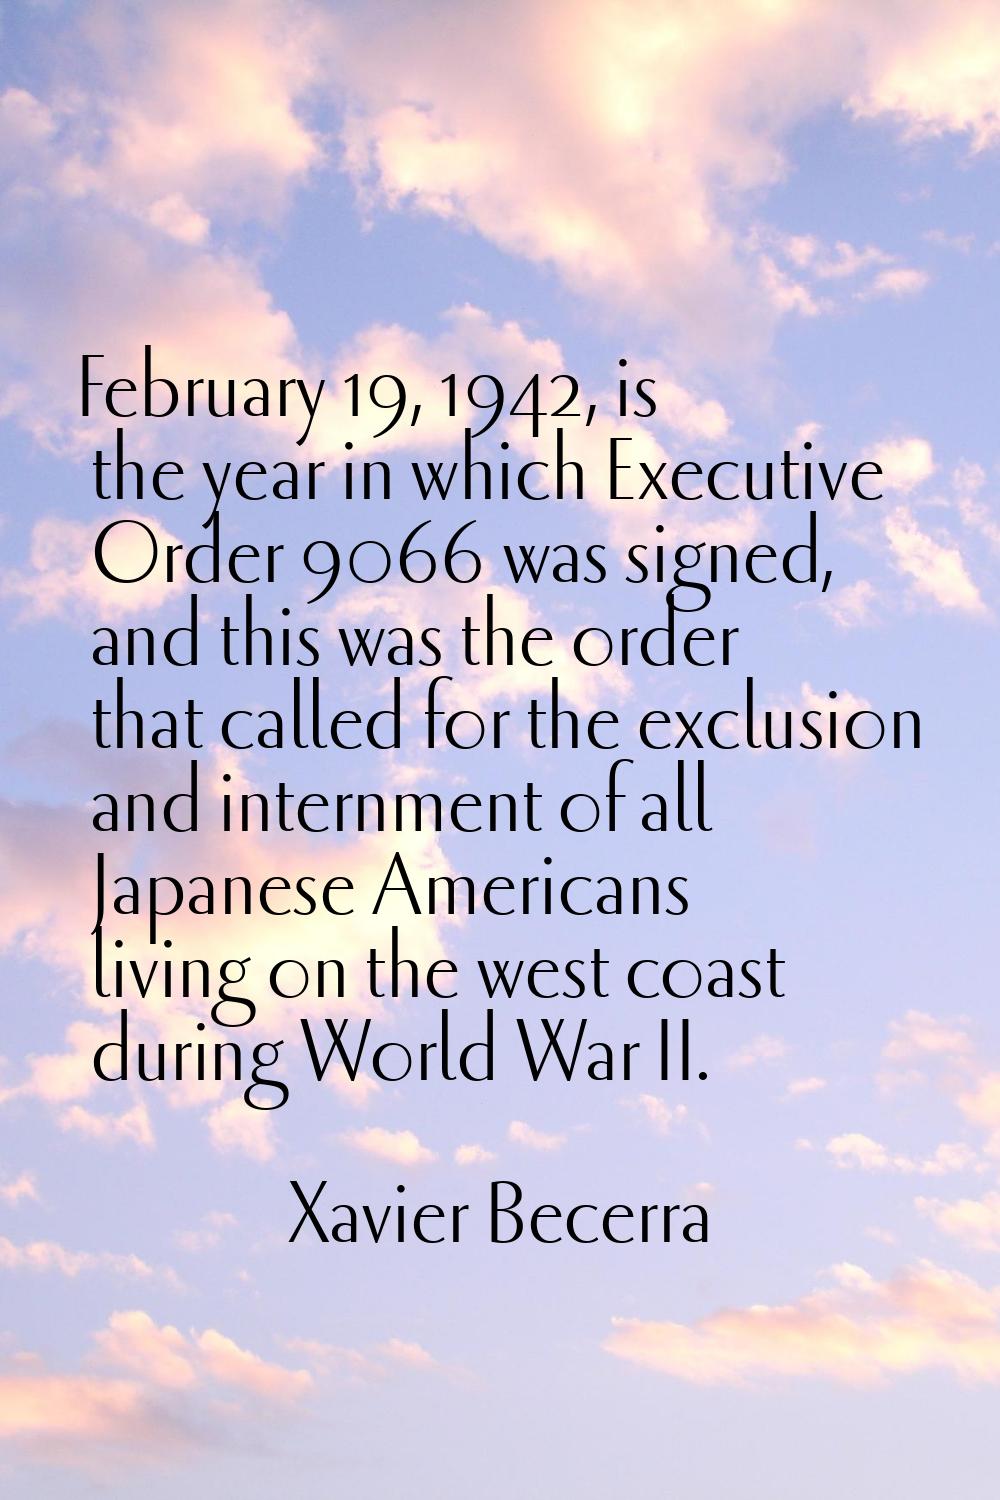 February 19, 1942, is the year in which Executive Order 9066 was signed, and this was the order tha